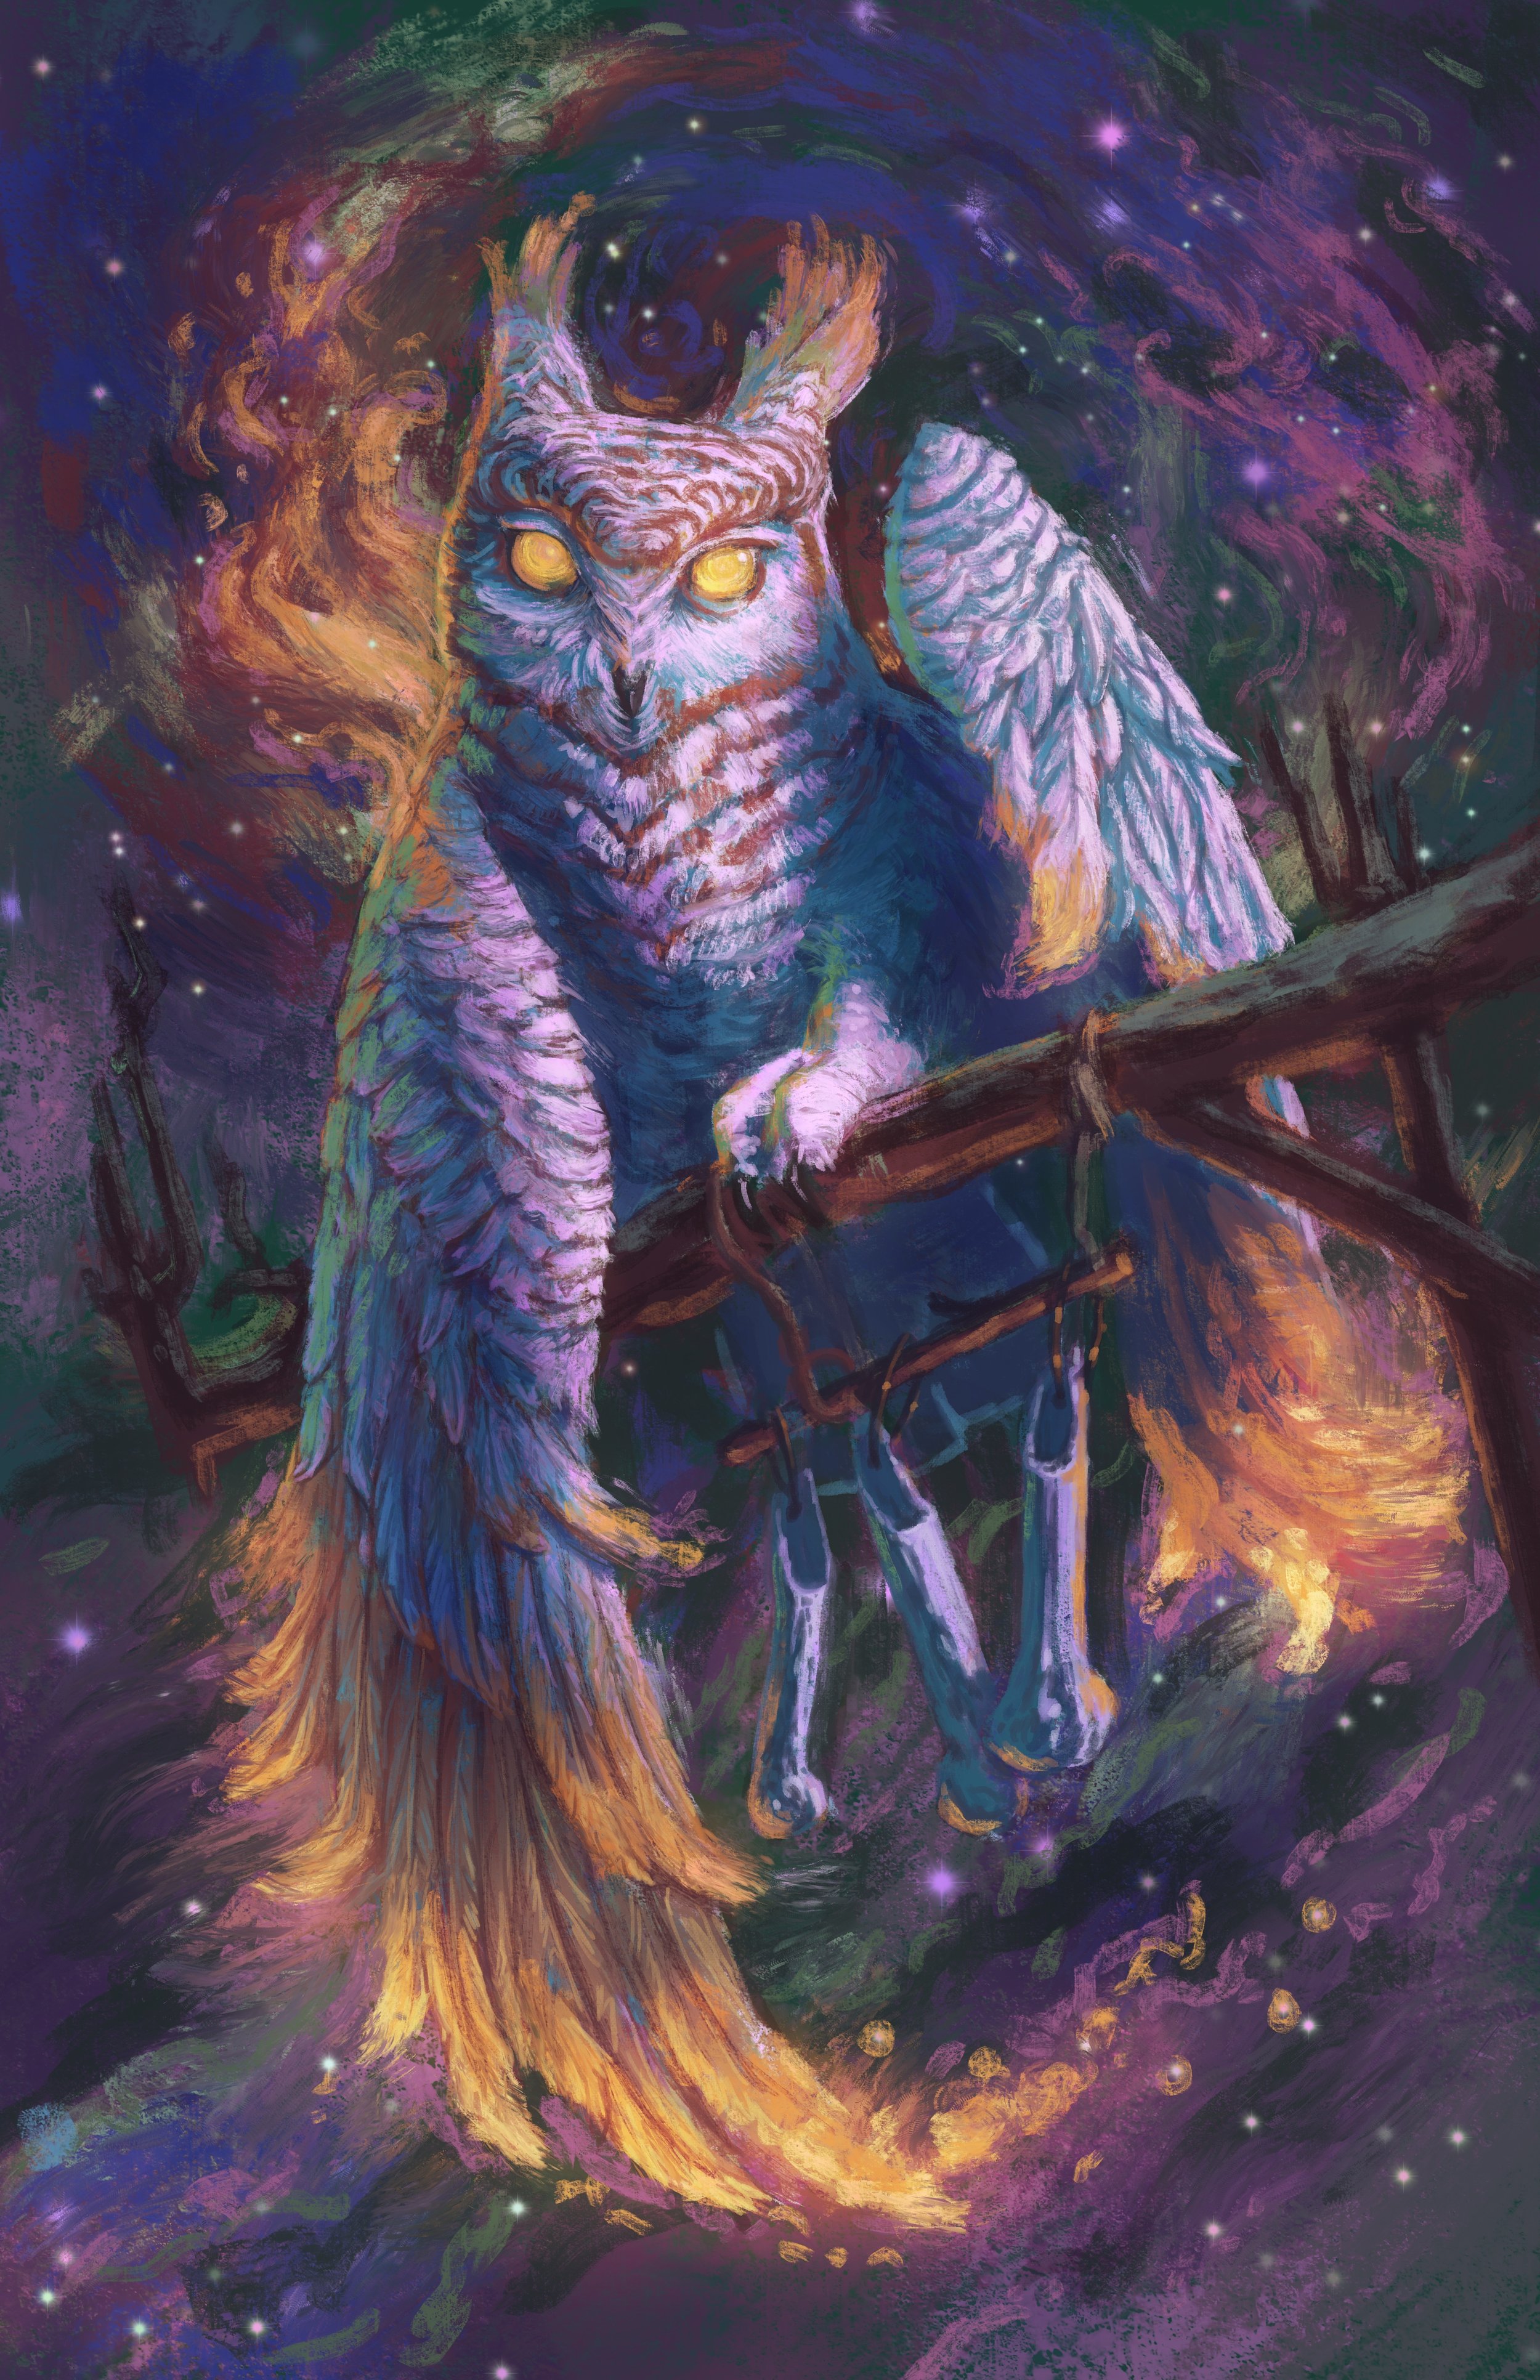 Year of the Owl